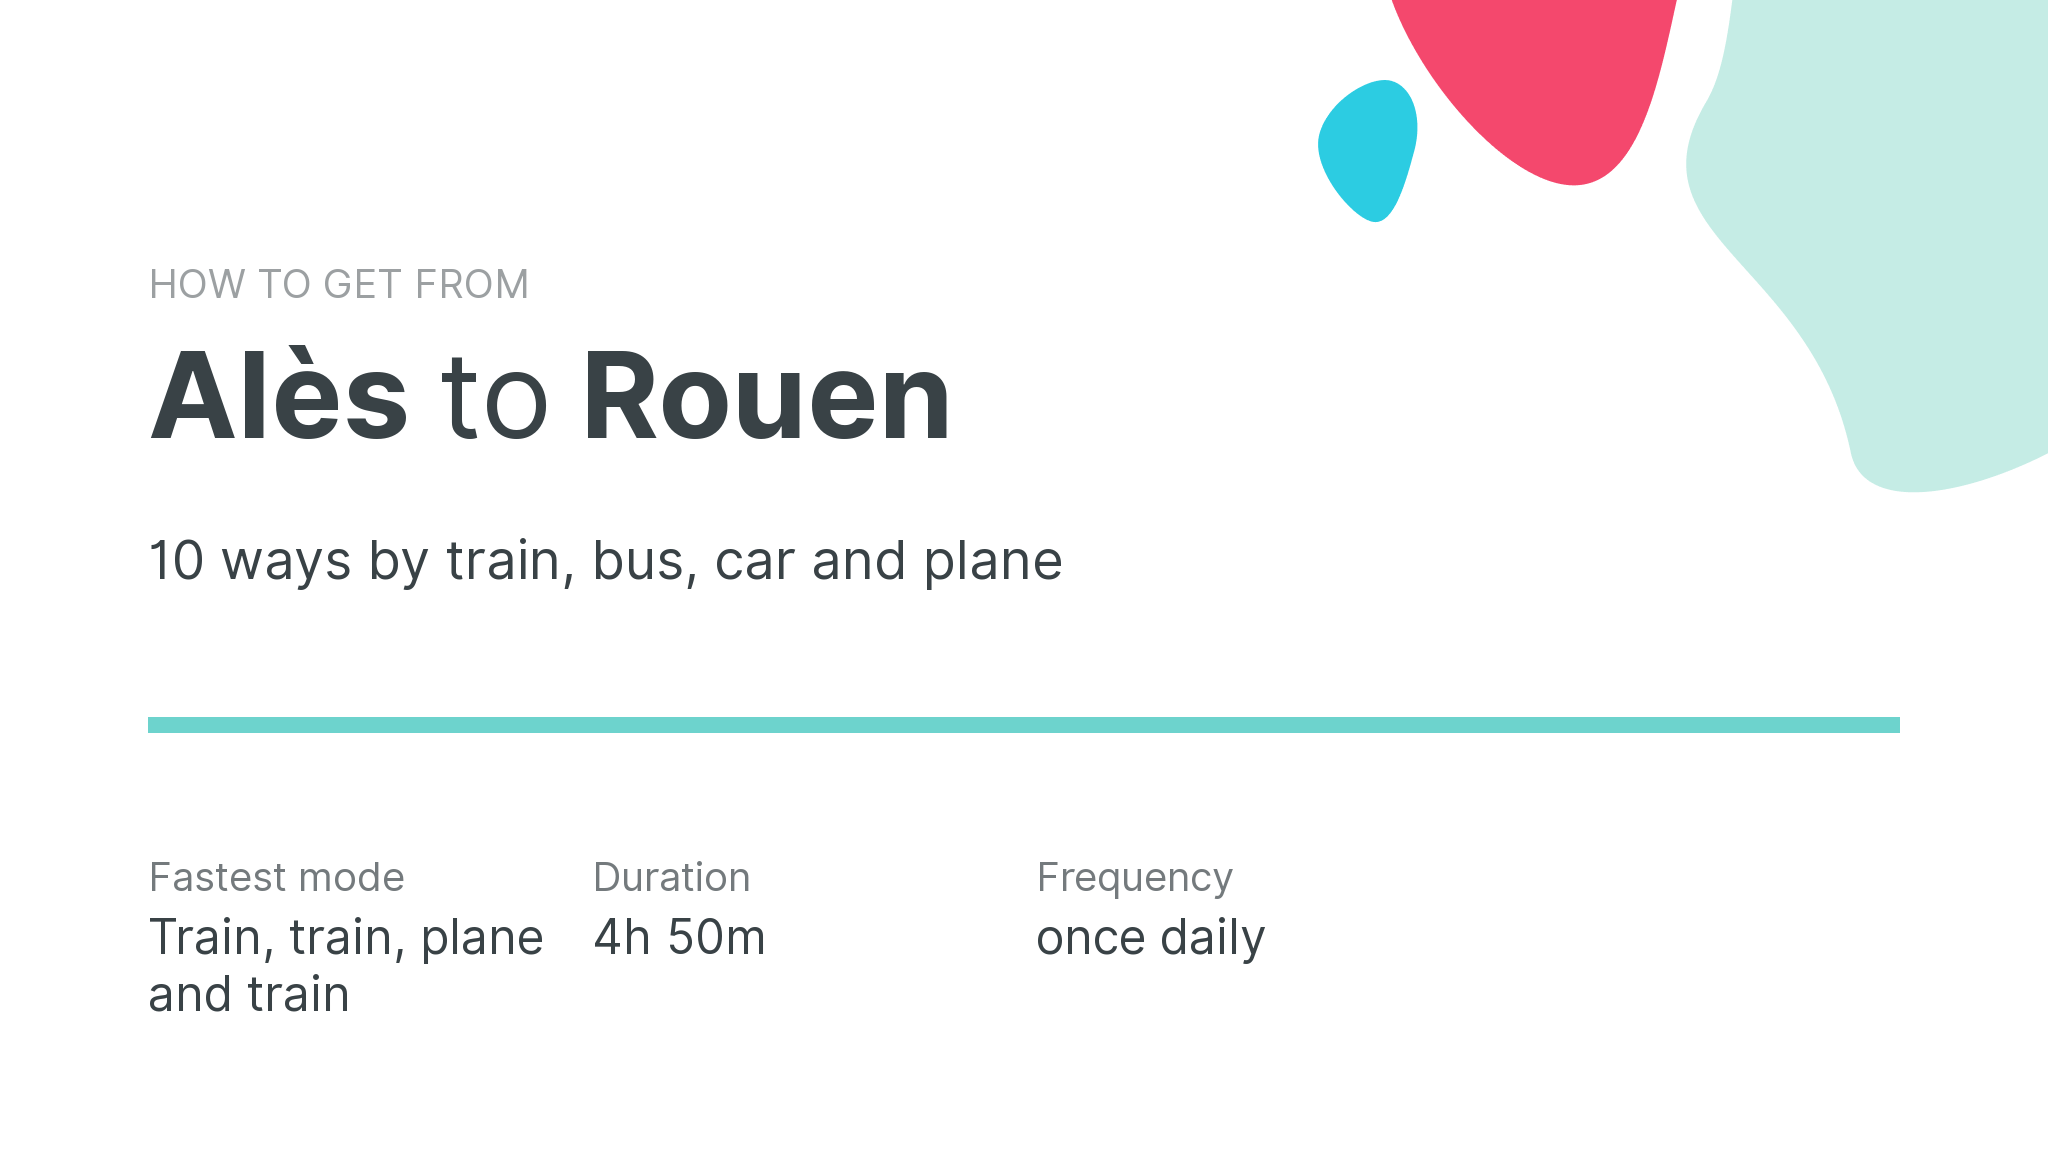 How do I get from Alès to Rouen